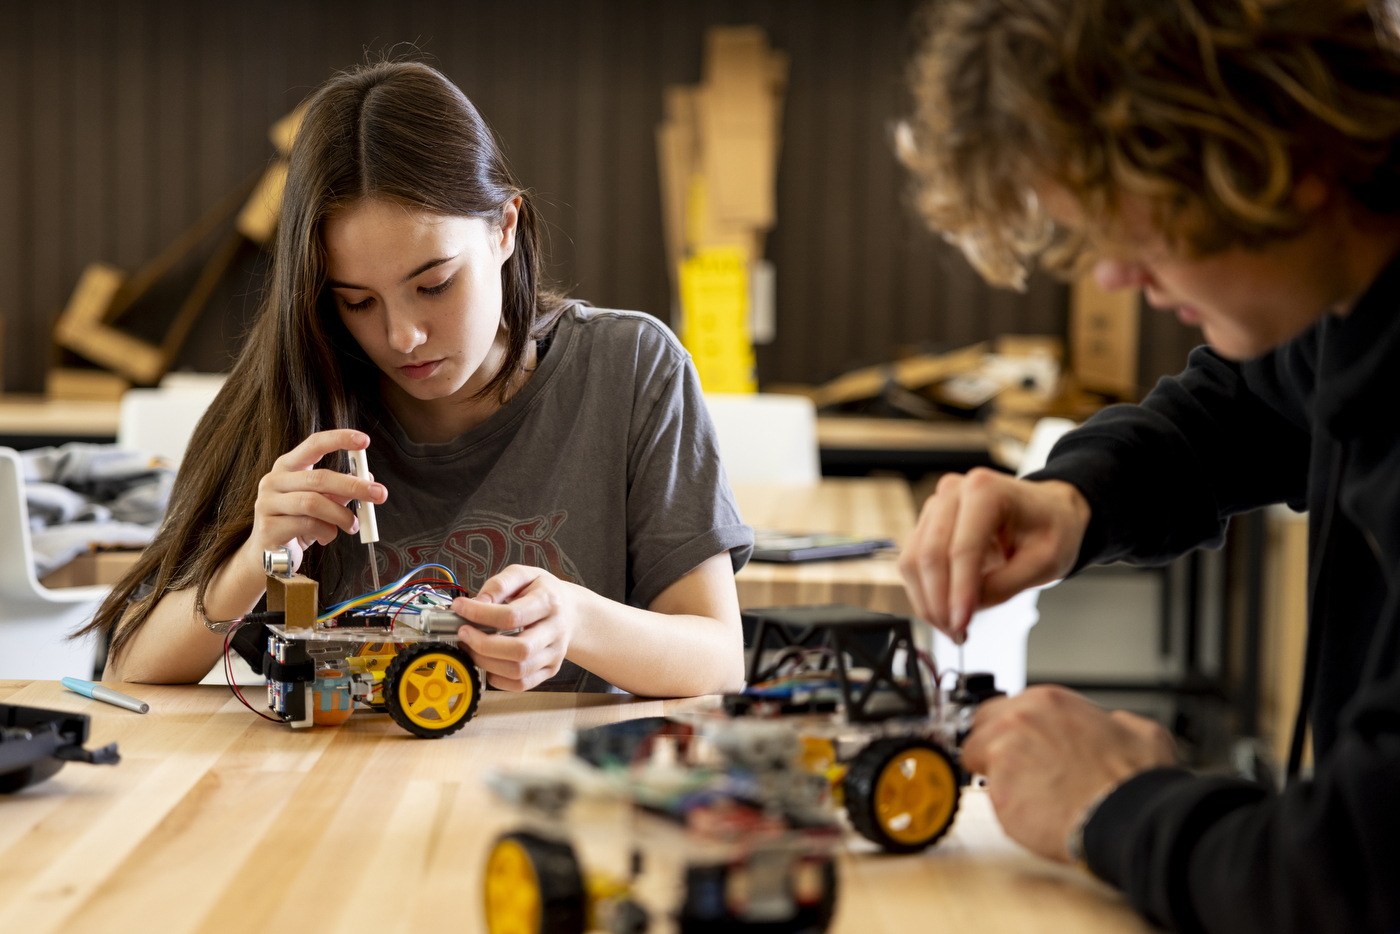 Students working on a self-driving robot at a table.